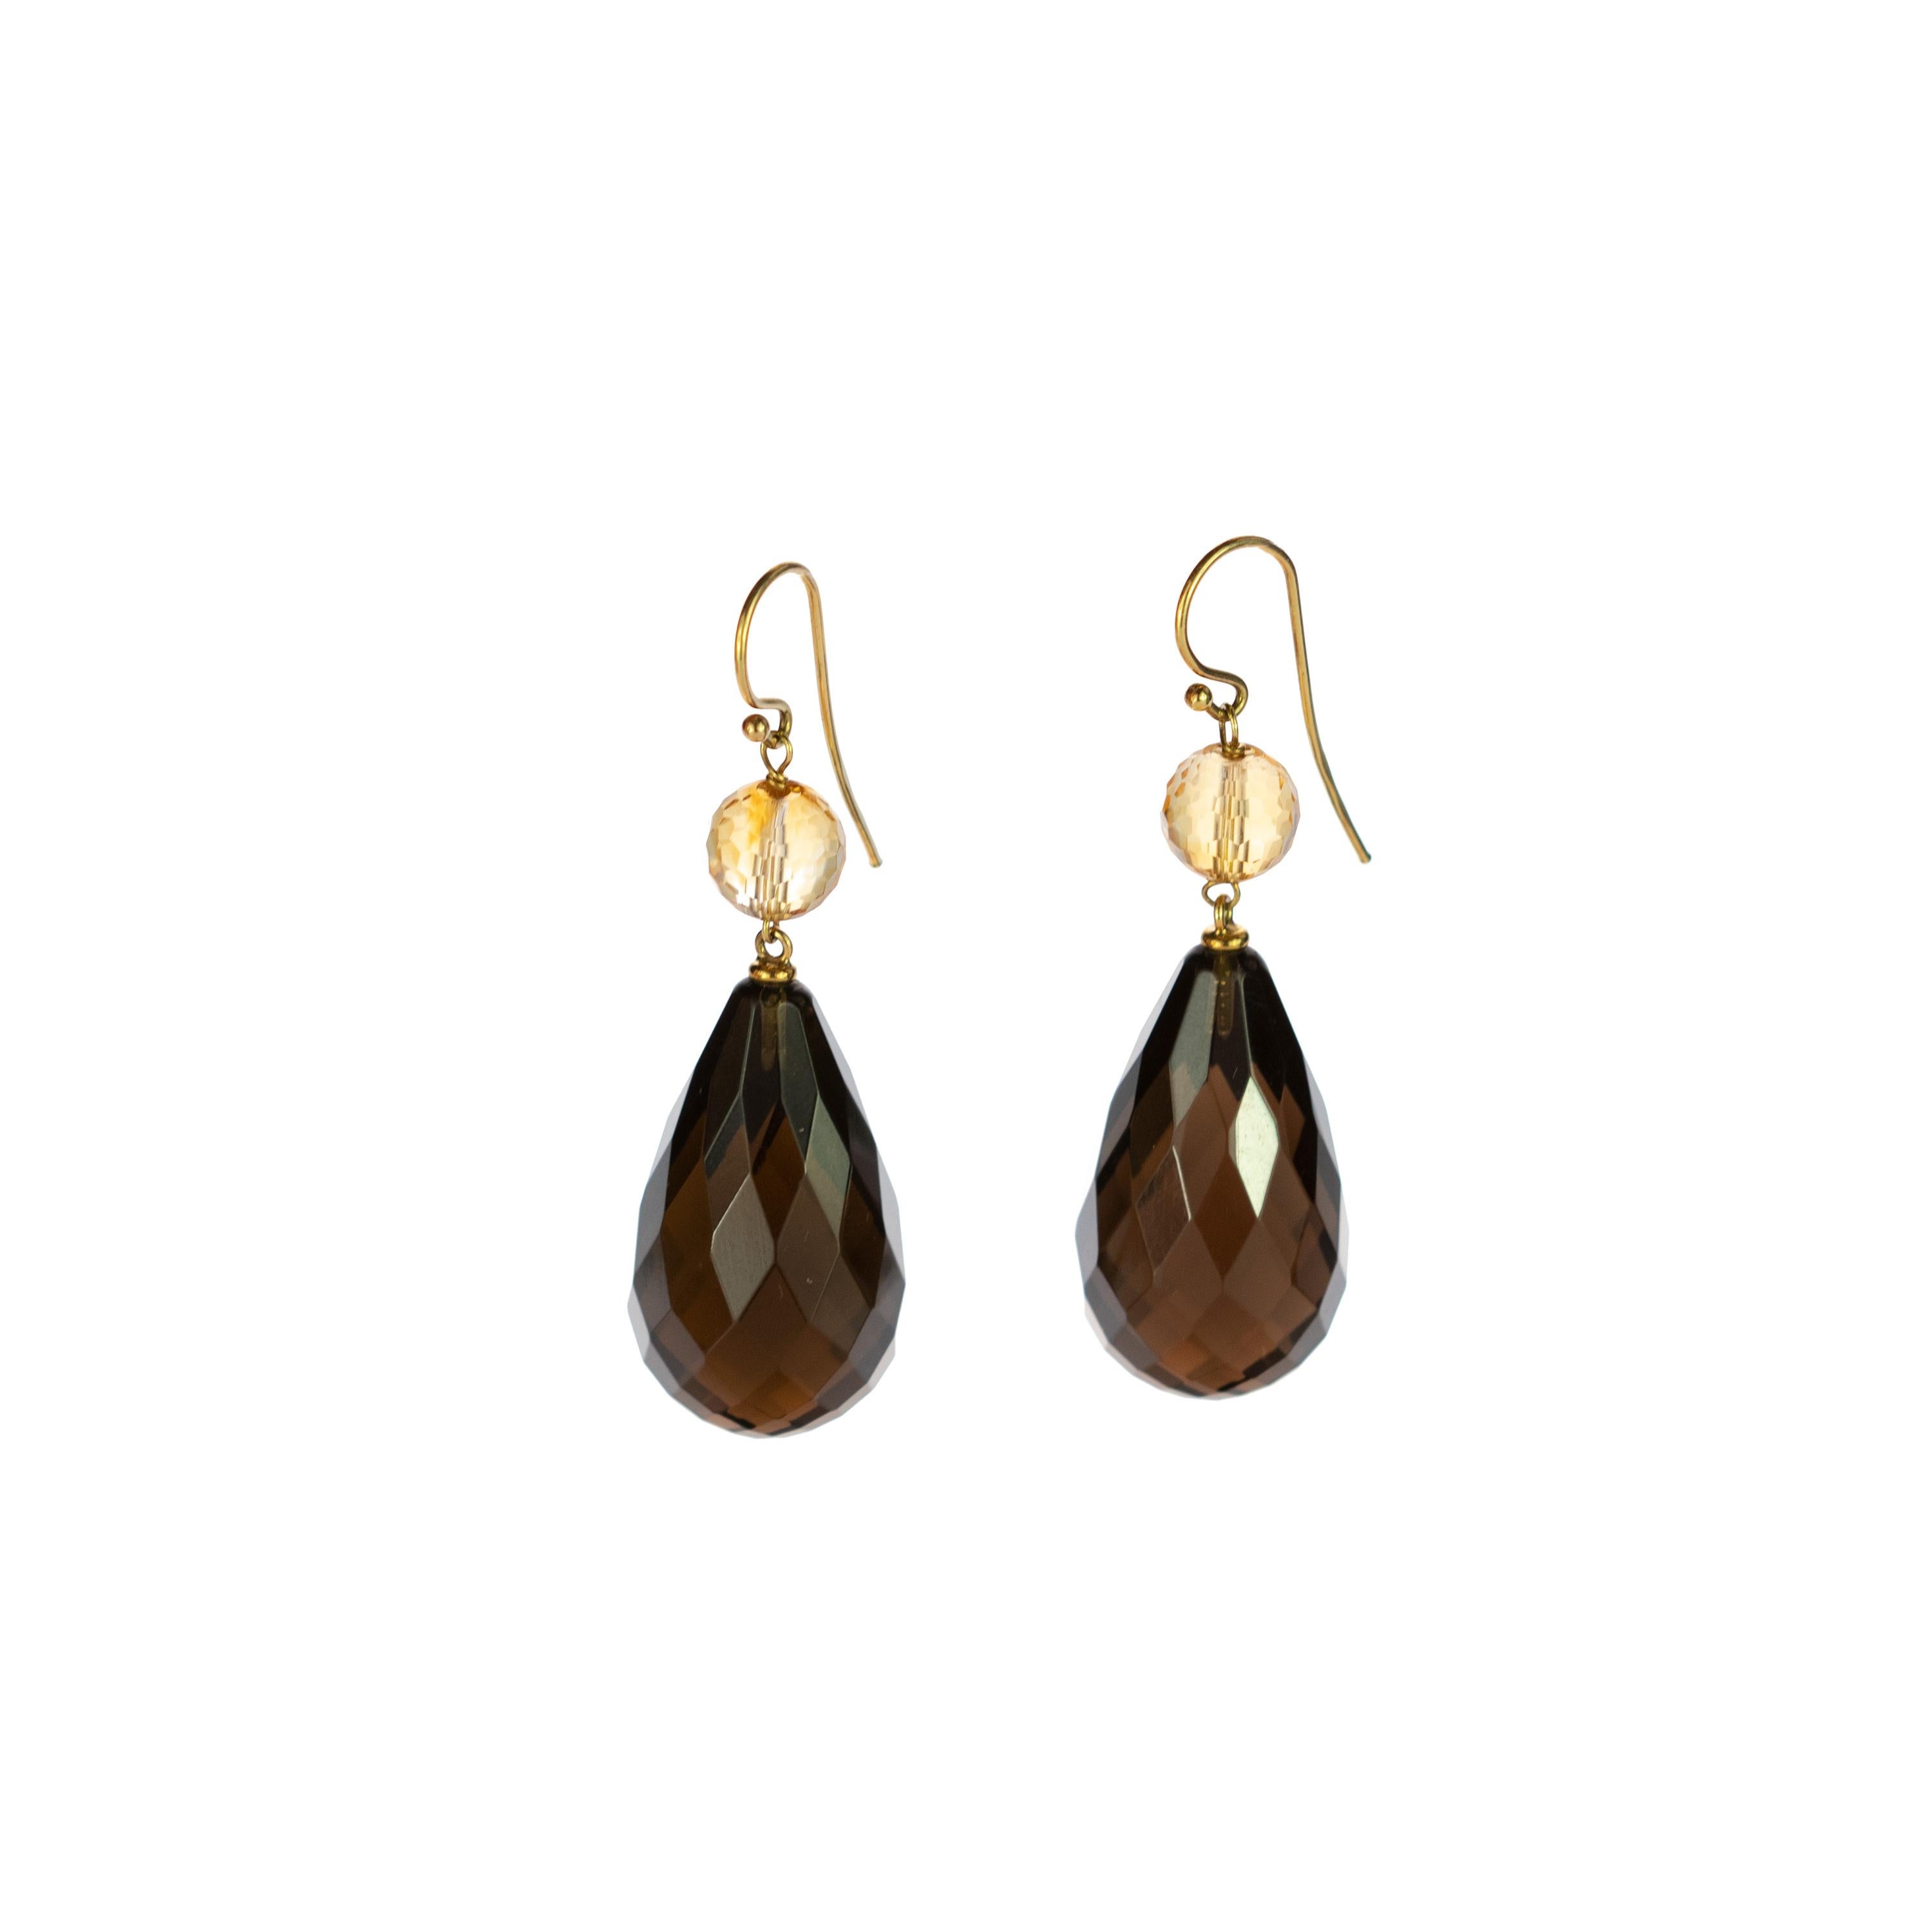 An enchanted radiant Fume Quartz round spheres held by an 18 karat yellow gold delicate chain to a deep dark Citrine quartz briolette. Modern tear designs jewels that combine voluminous shapes with vivid colours, resulting in dangle and bold,